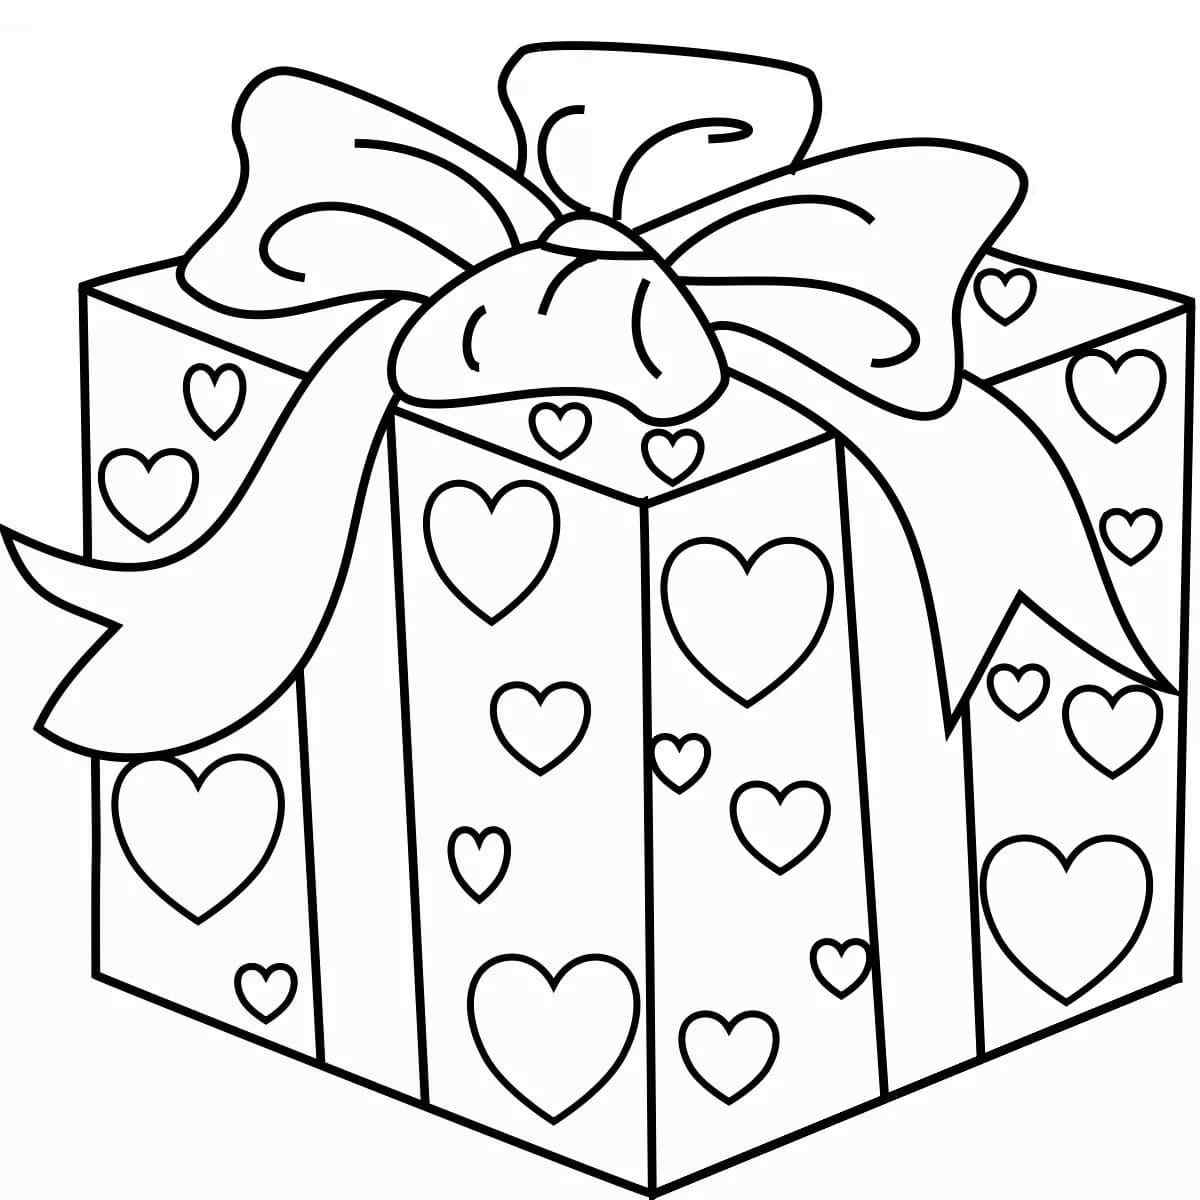 Gift Wrapping Boxes In Hearts